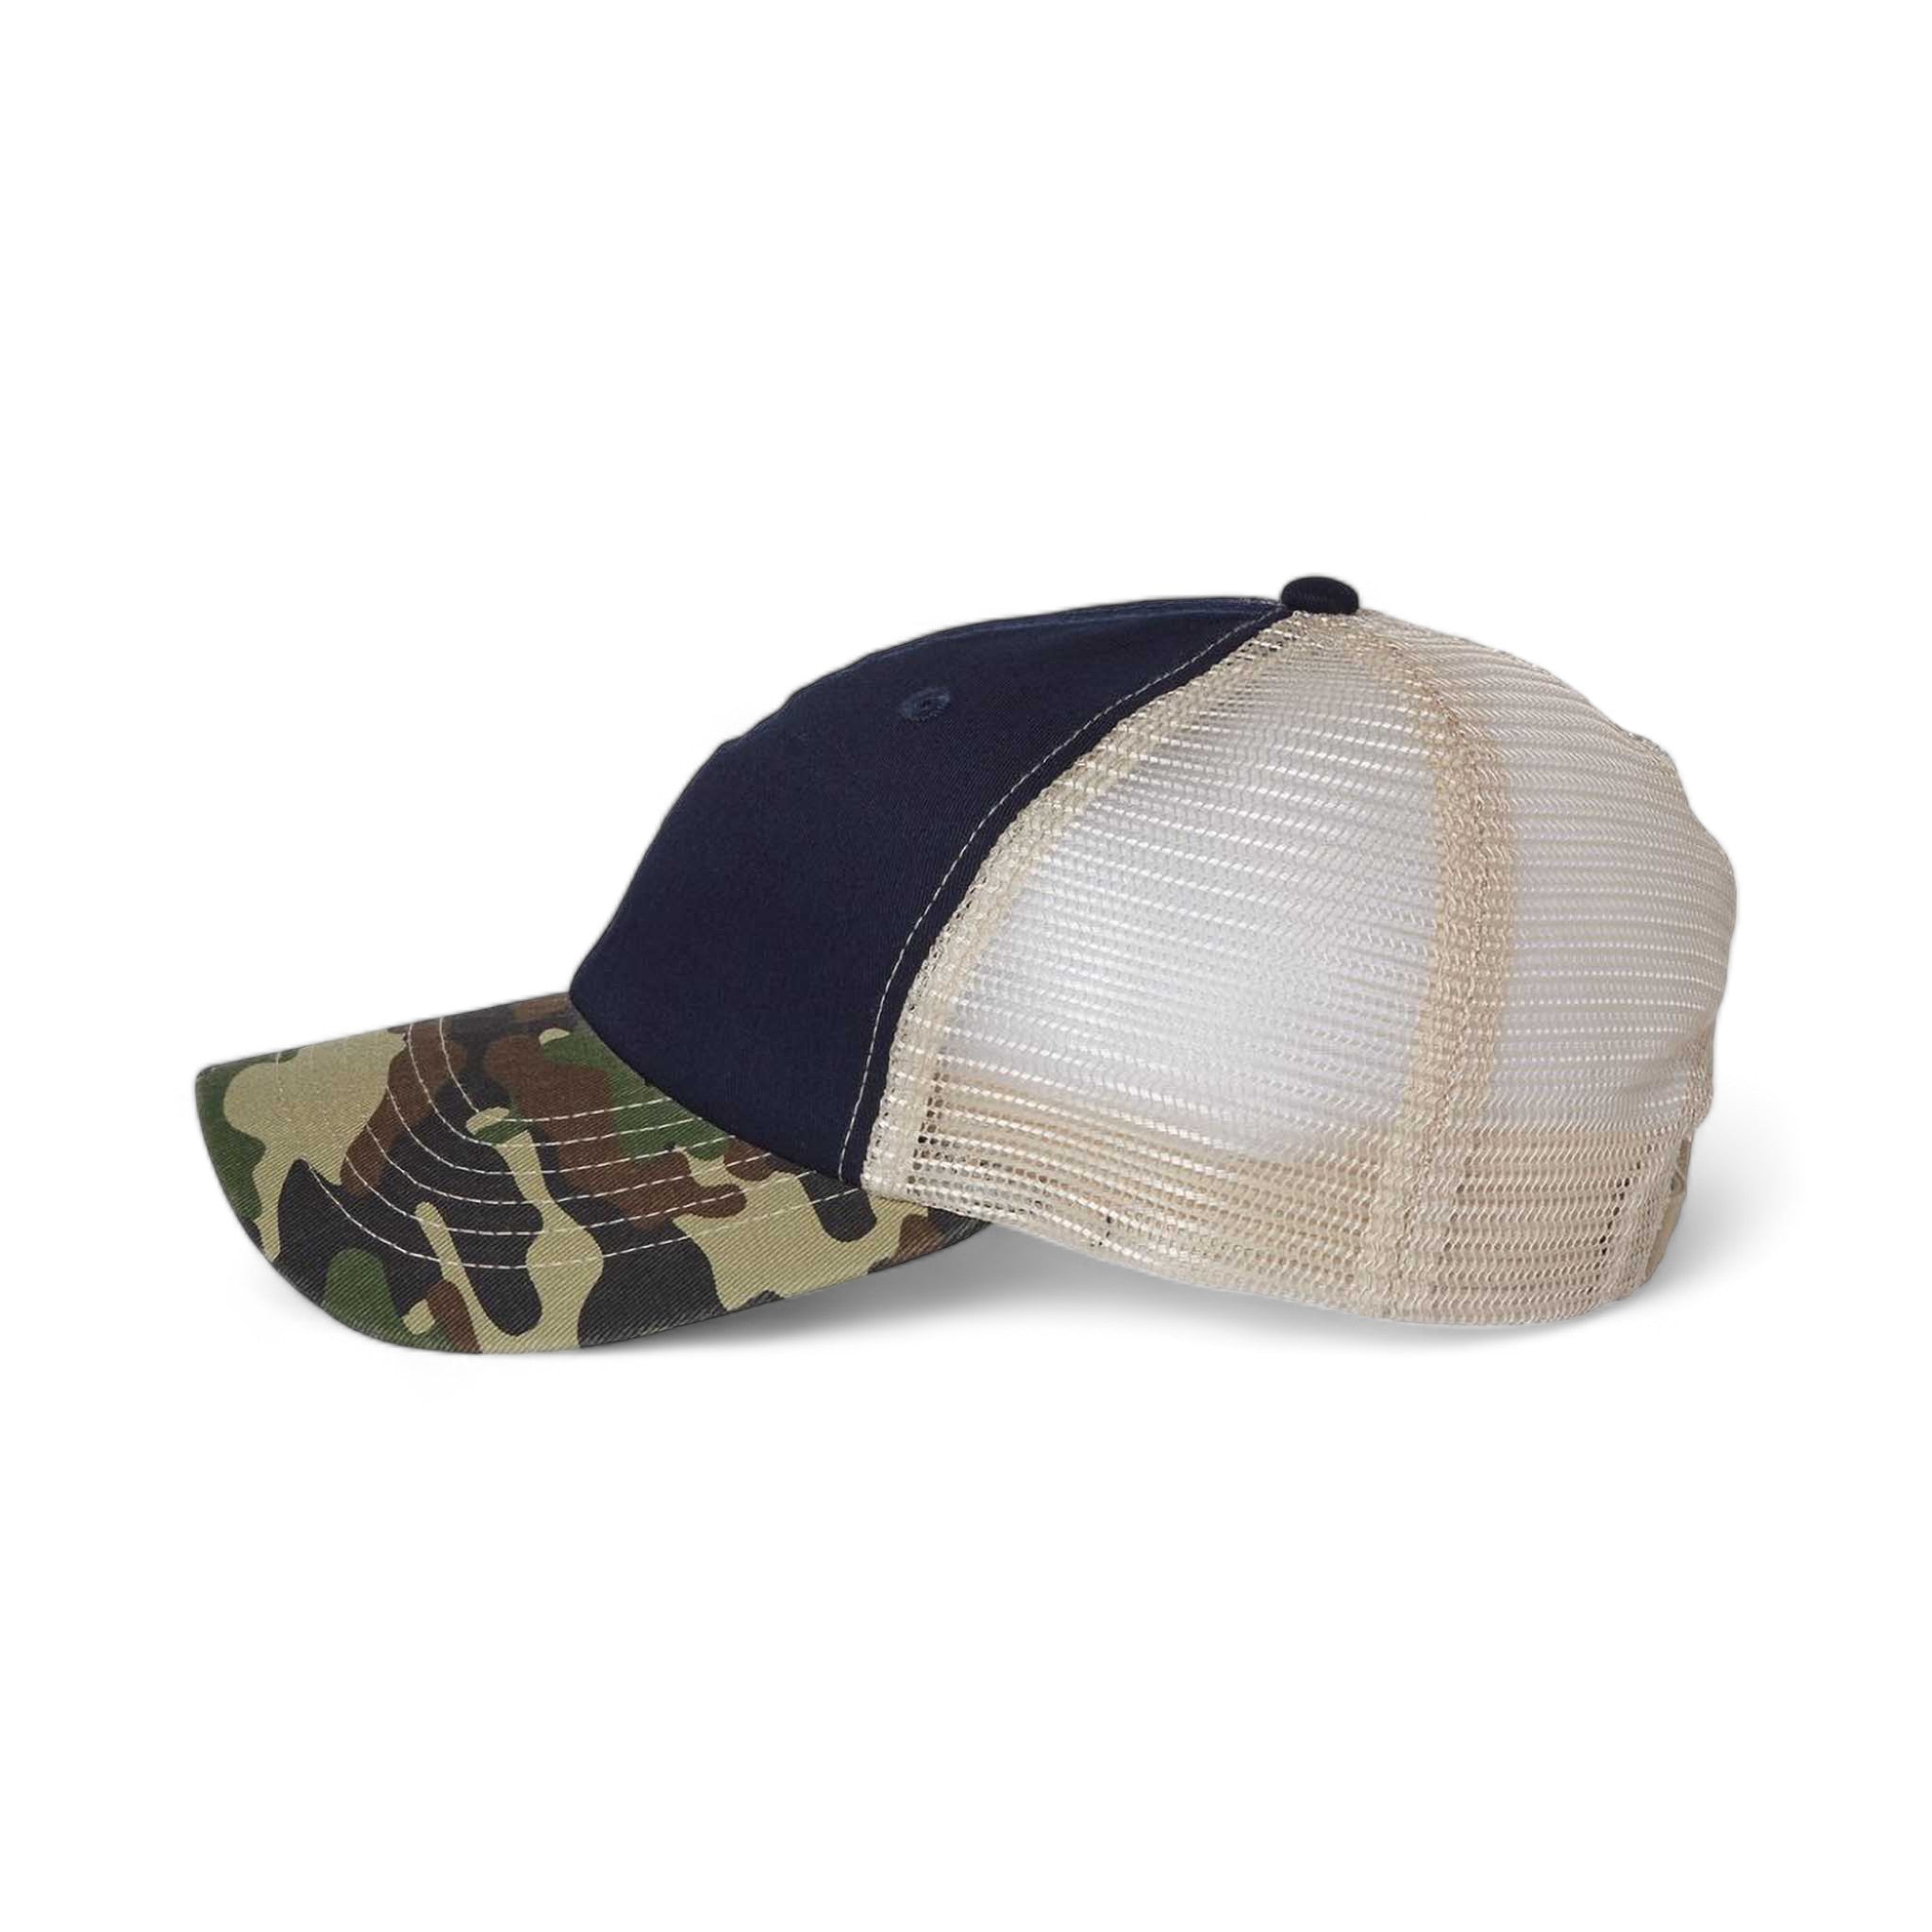 Side view of Sportsman 3100 custom hat in navy, camo and stone